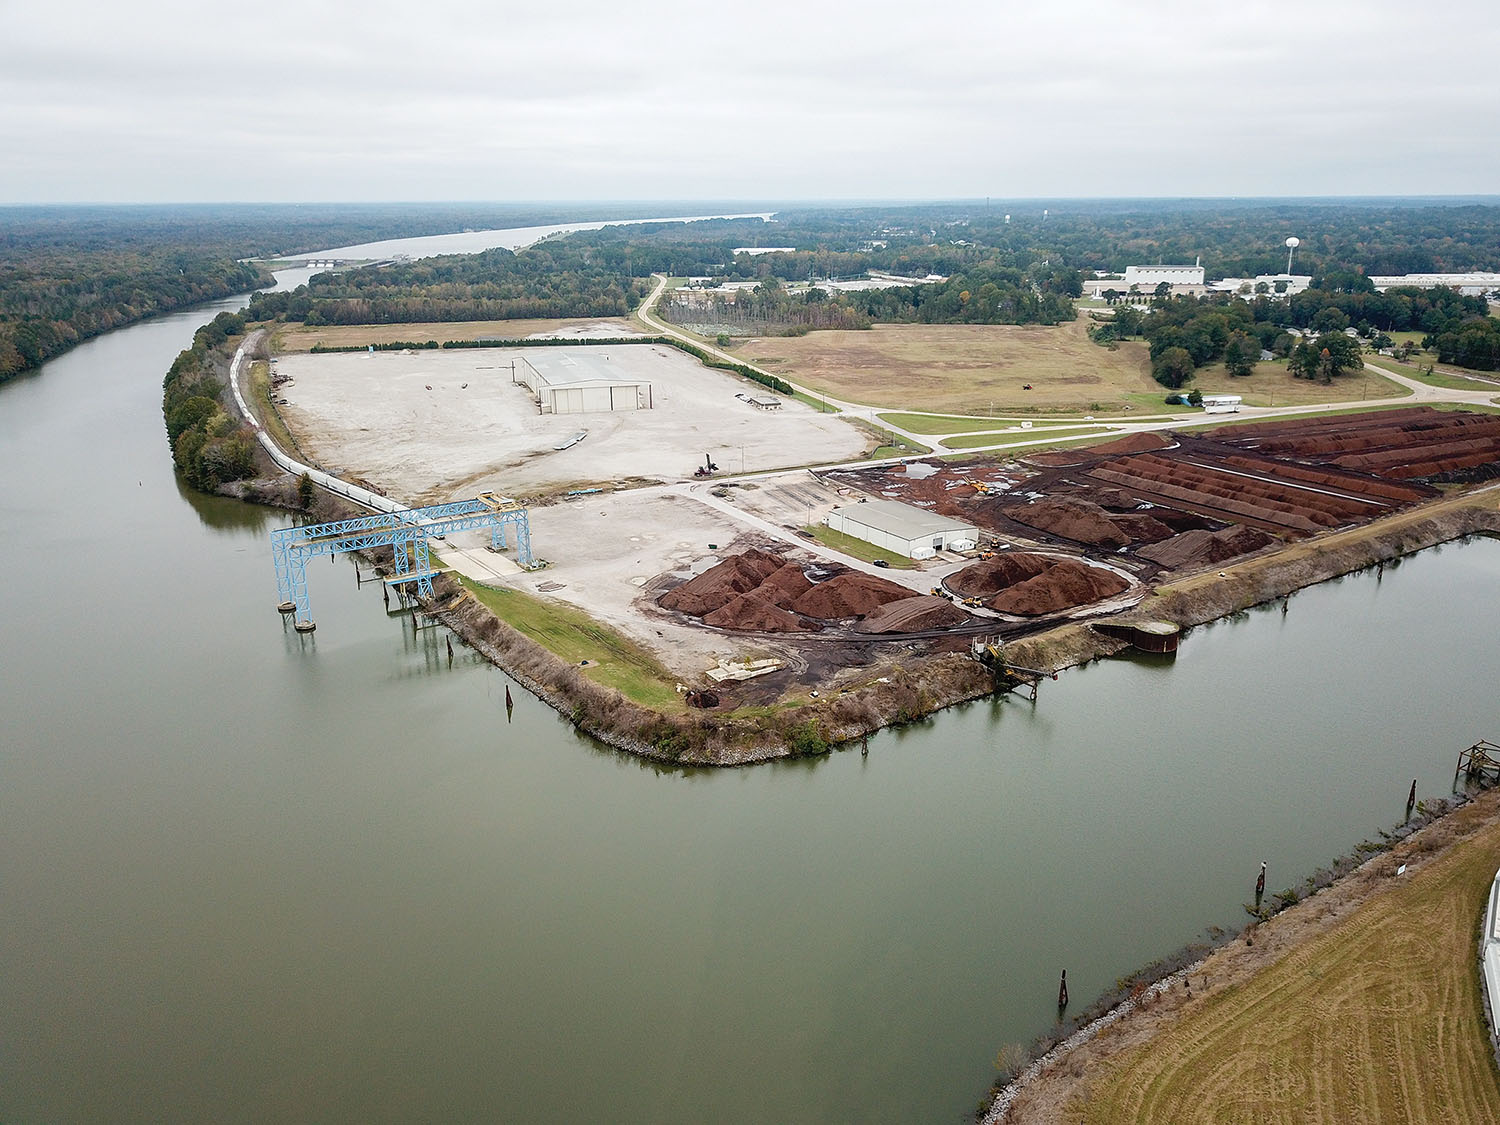 Federal Marine Terminals Inc. has taken over the operation of Port Itawamba on the Tennessee-Tombigbee River at Mile 390.0. The company plans to refocus the port toward bulk and breakbulk cargoes. (Photo courtesy of Federal Marine Terminals Inc.)